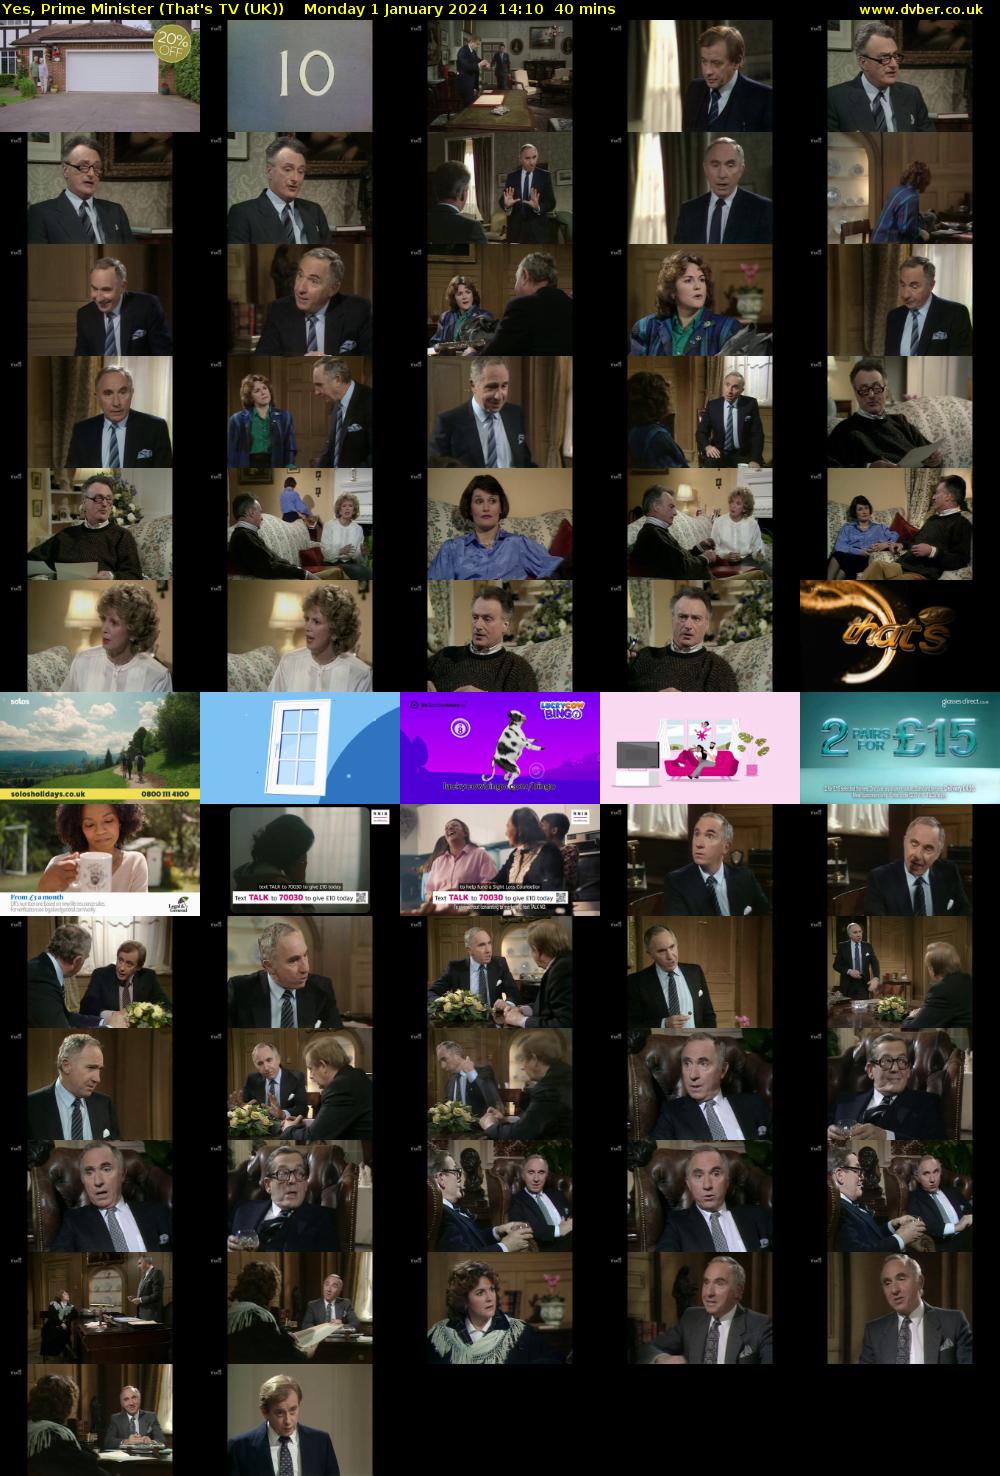 Yes, Prime Minister (That's TV (UK)) Monday 1 January 2024 14:10 - 14:50